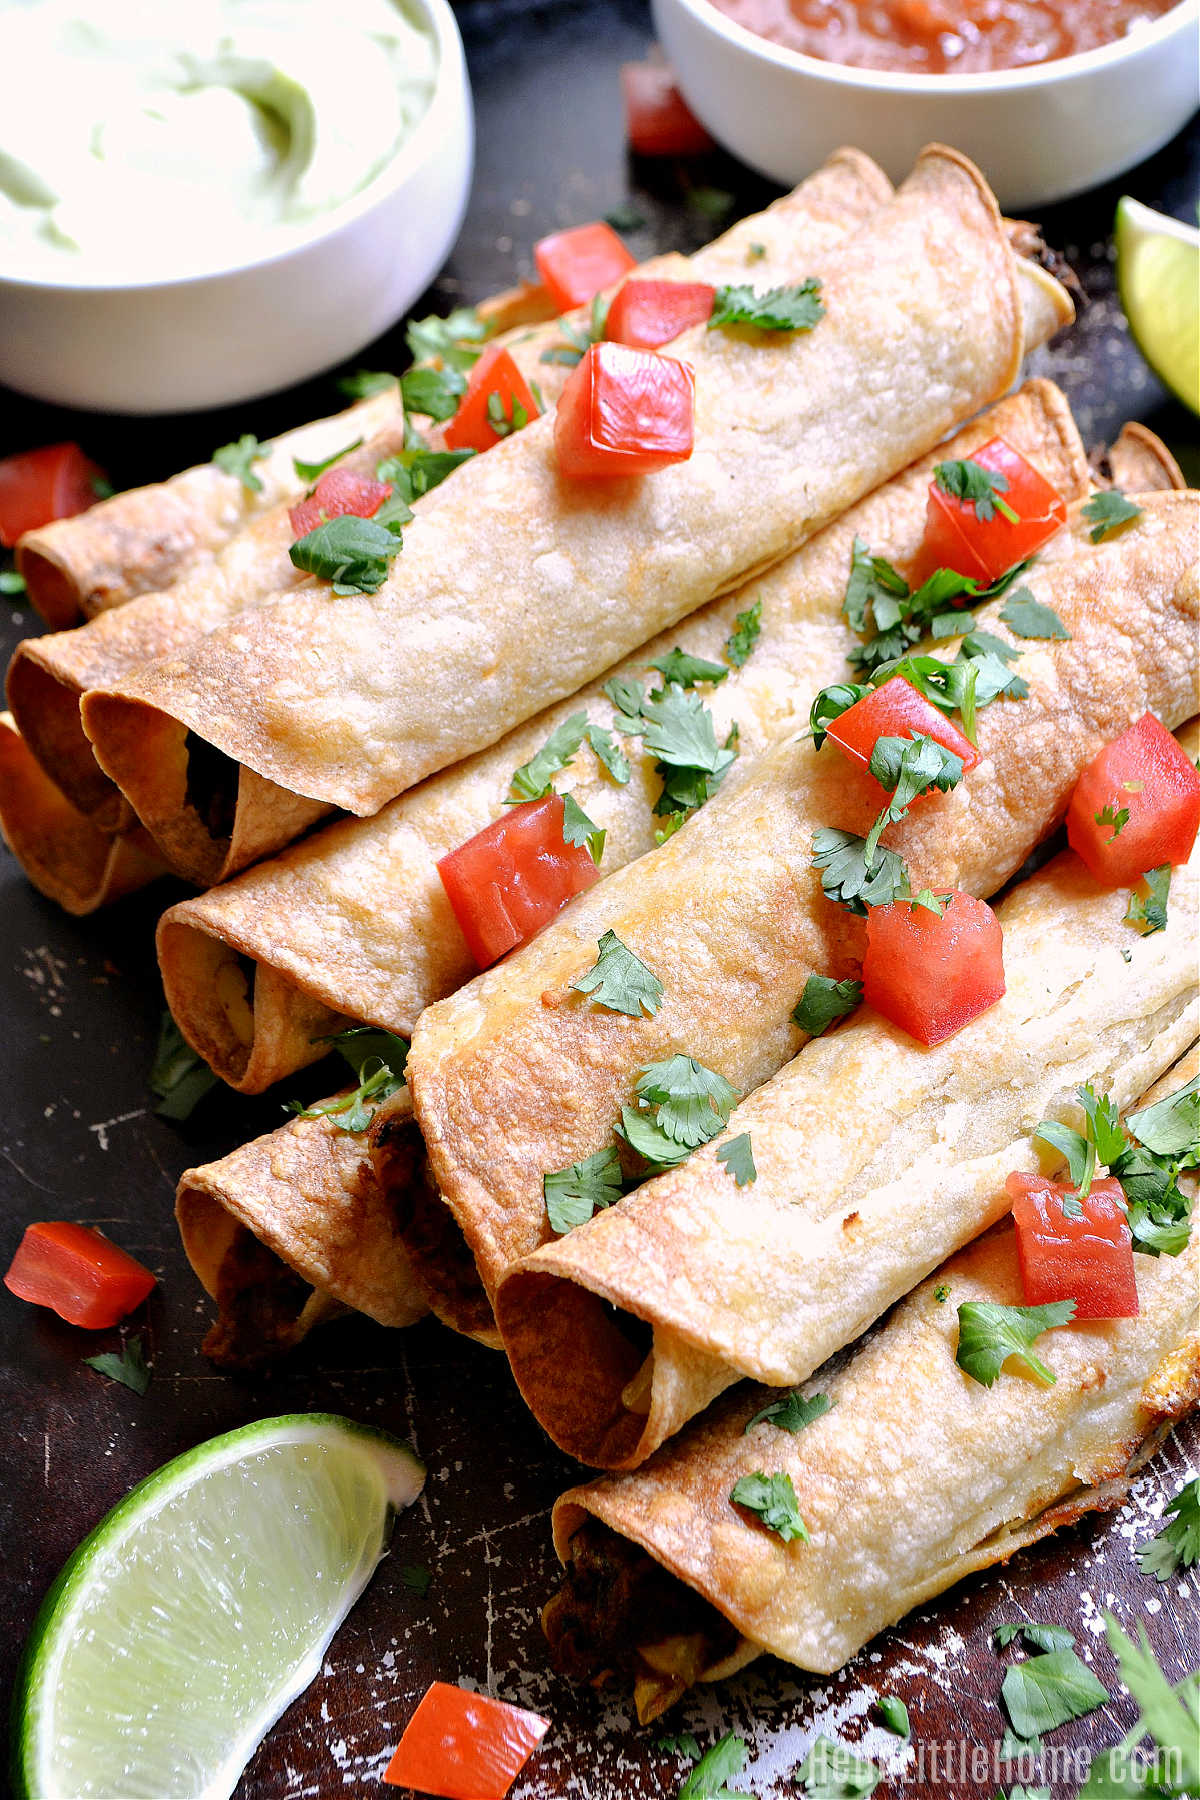 The finished veggie taquitos on a table with toppings and sauces.